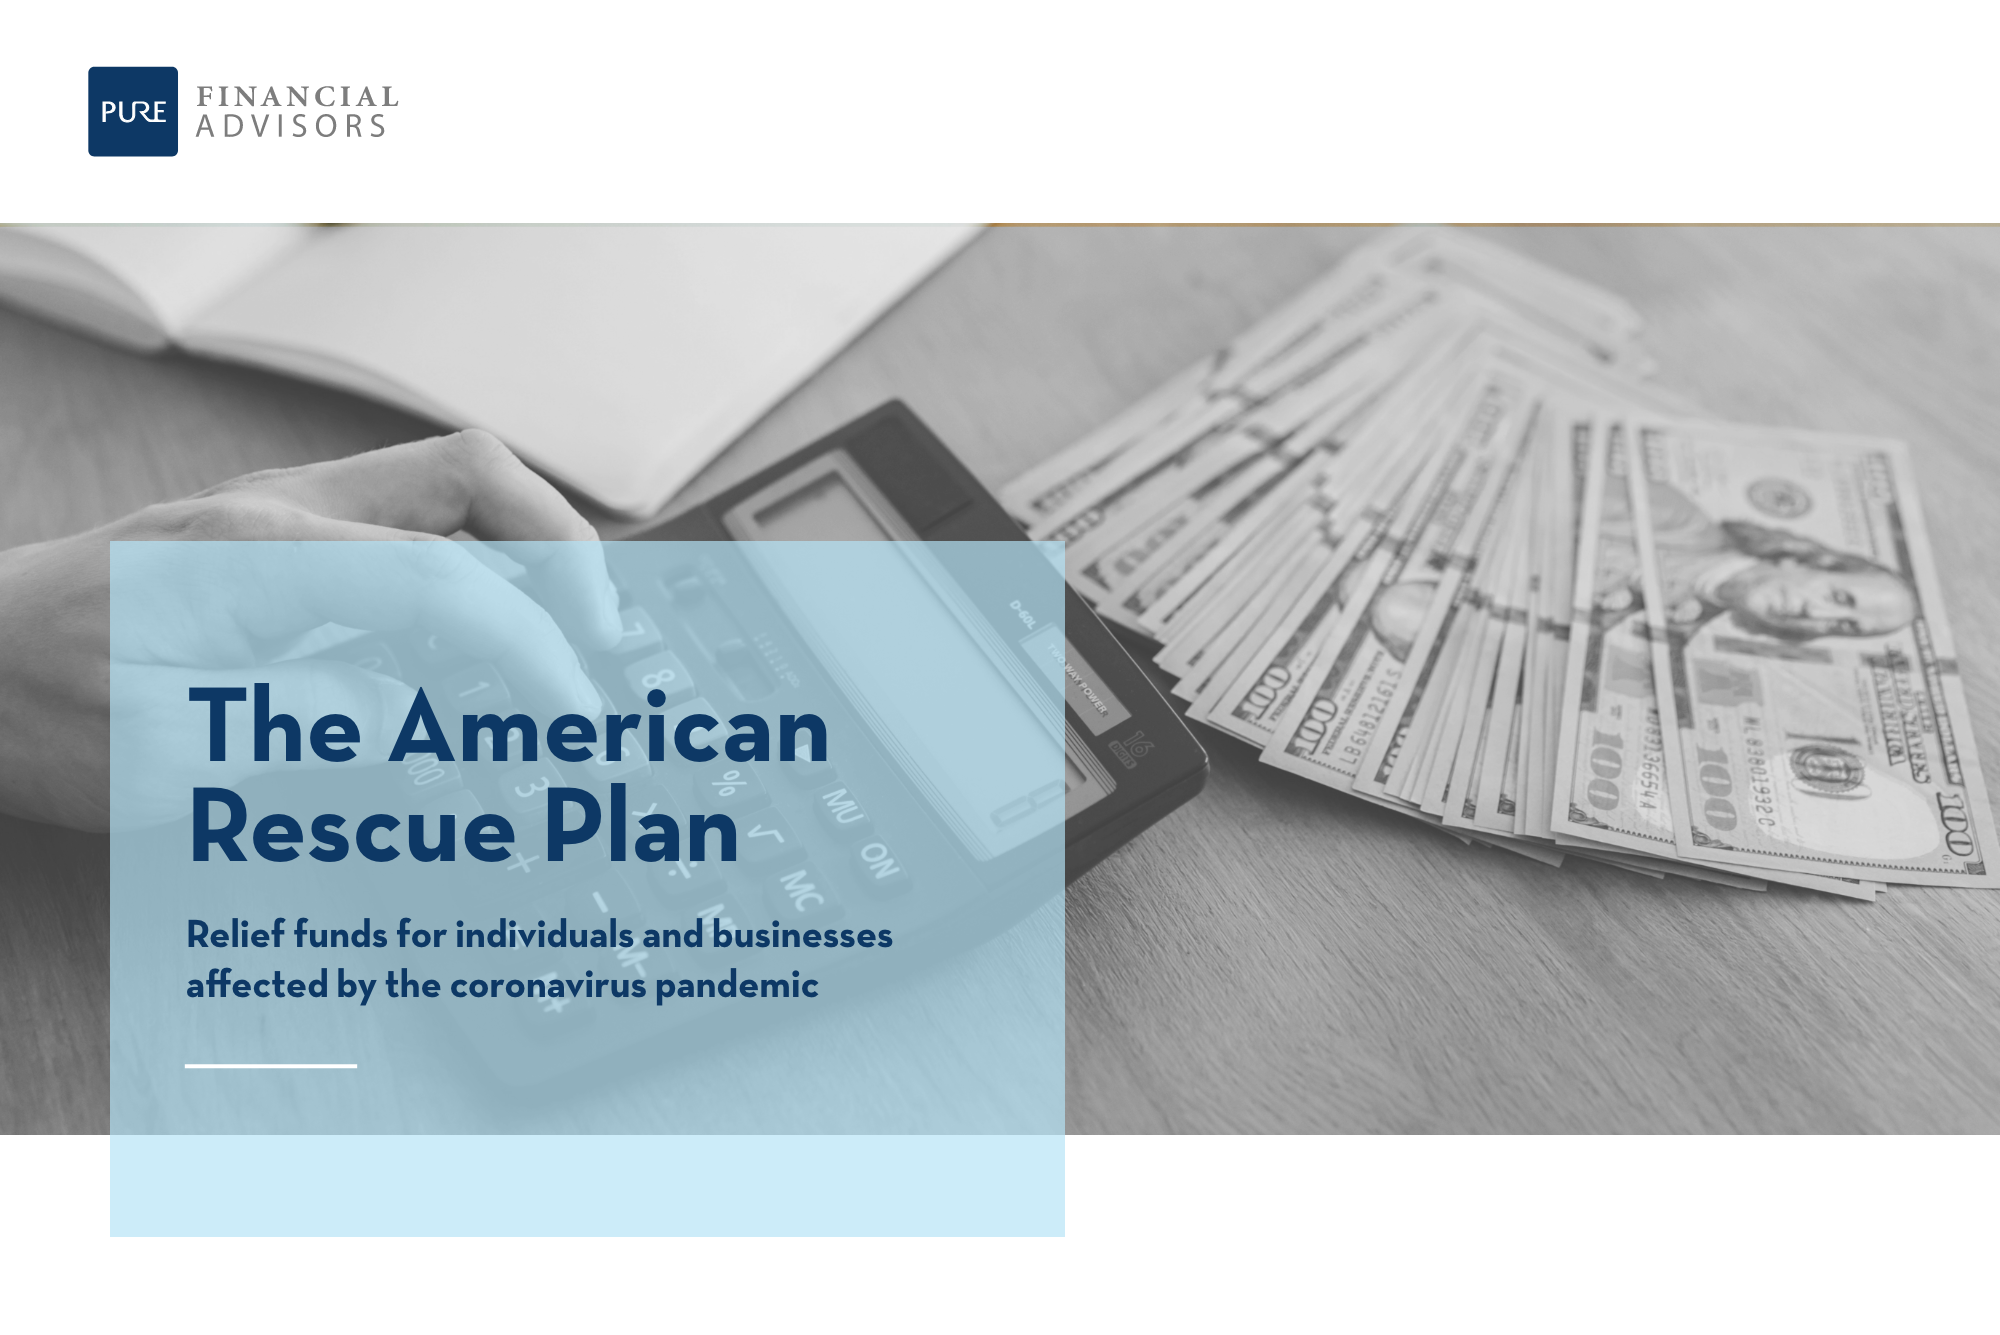 The American Rescue Plan